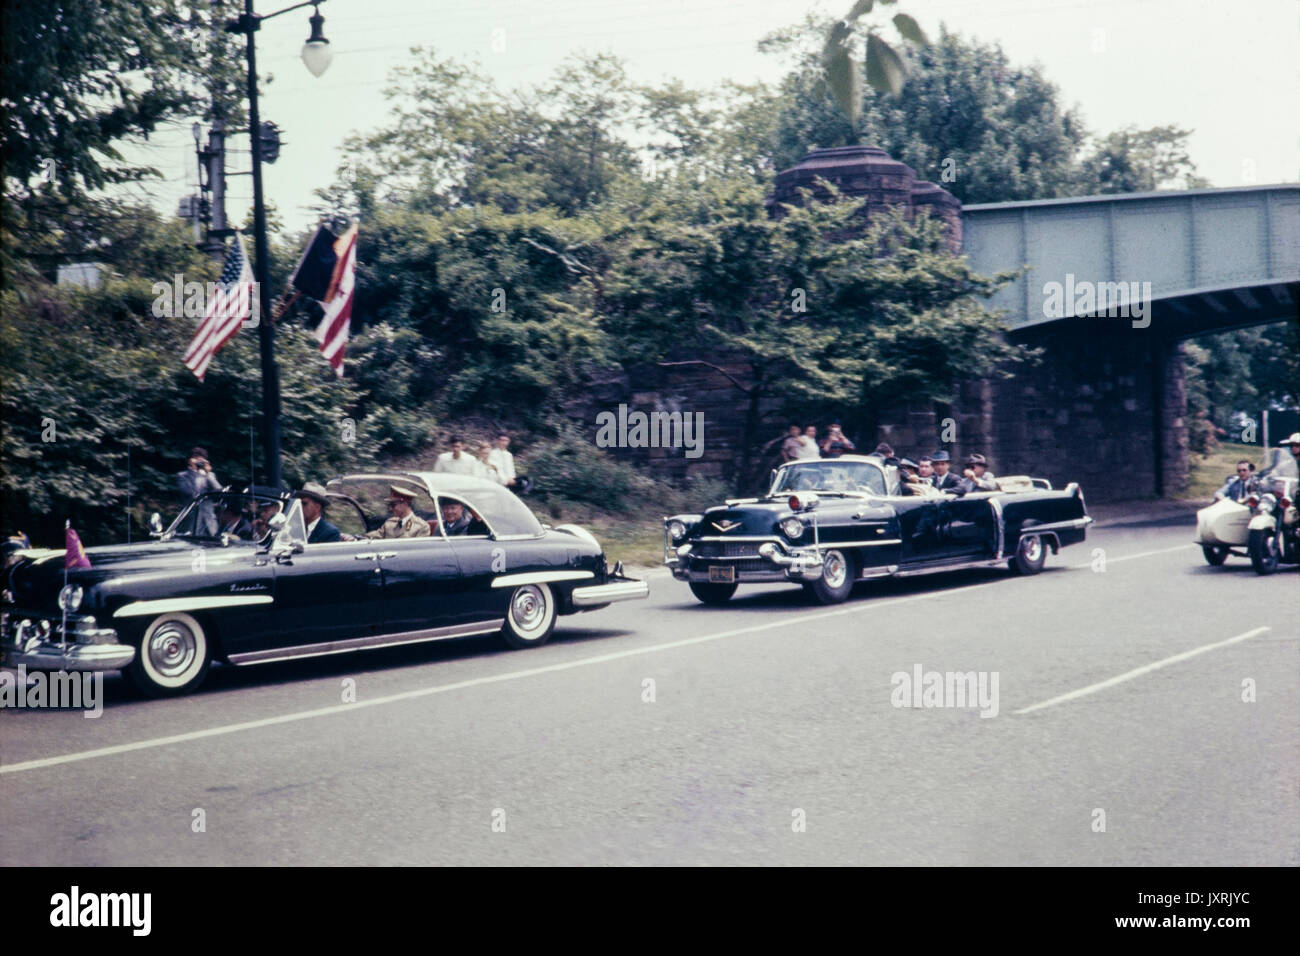 Motorcade carrying King Baudouin of Belgium through the streets of New York City in May 1959. Image shows cars and fashion of the period. Stock Photo